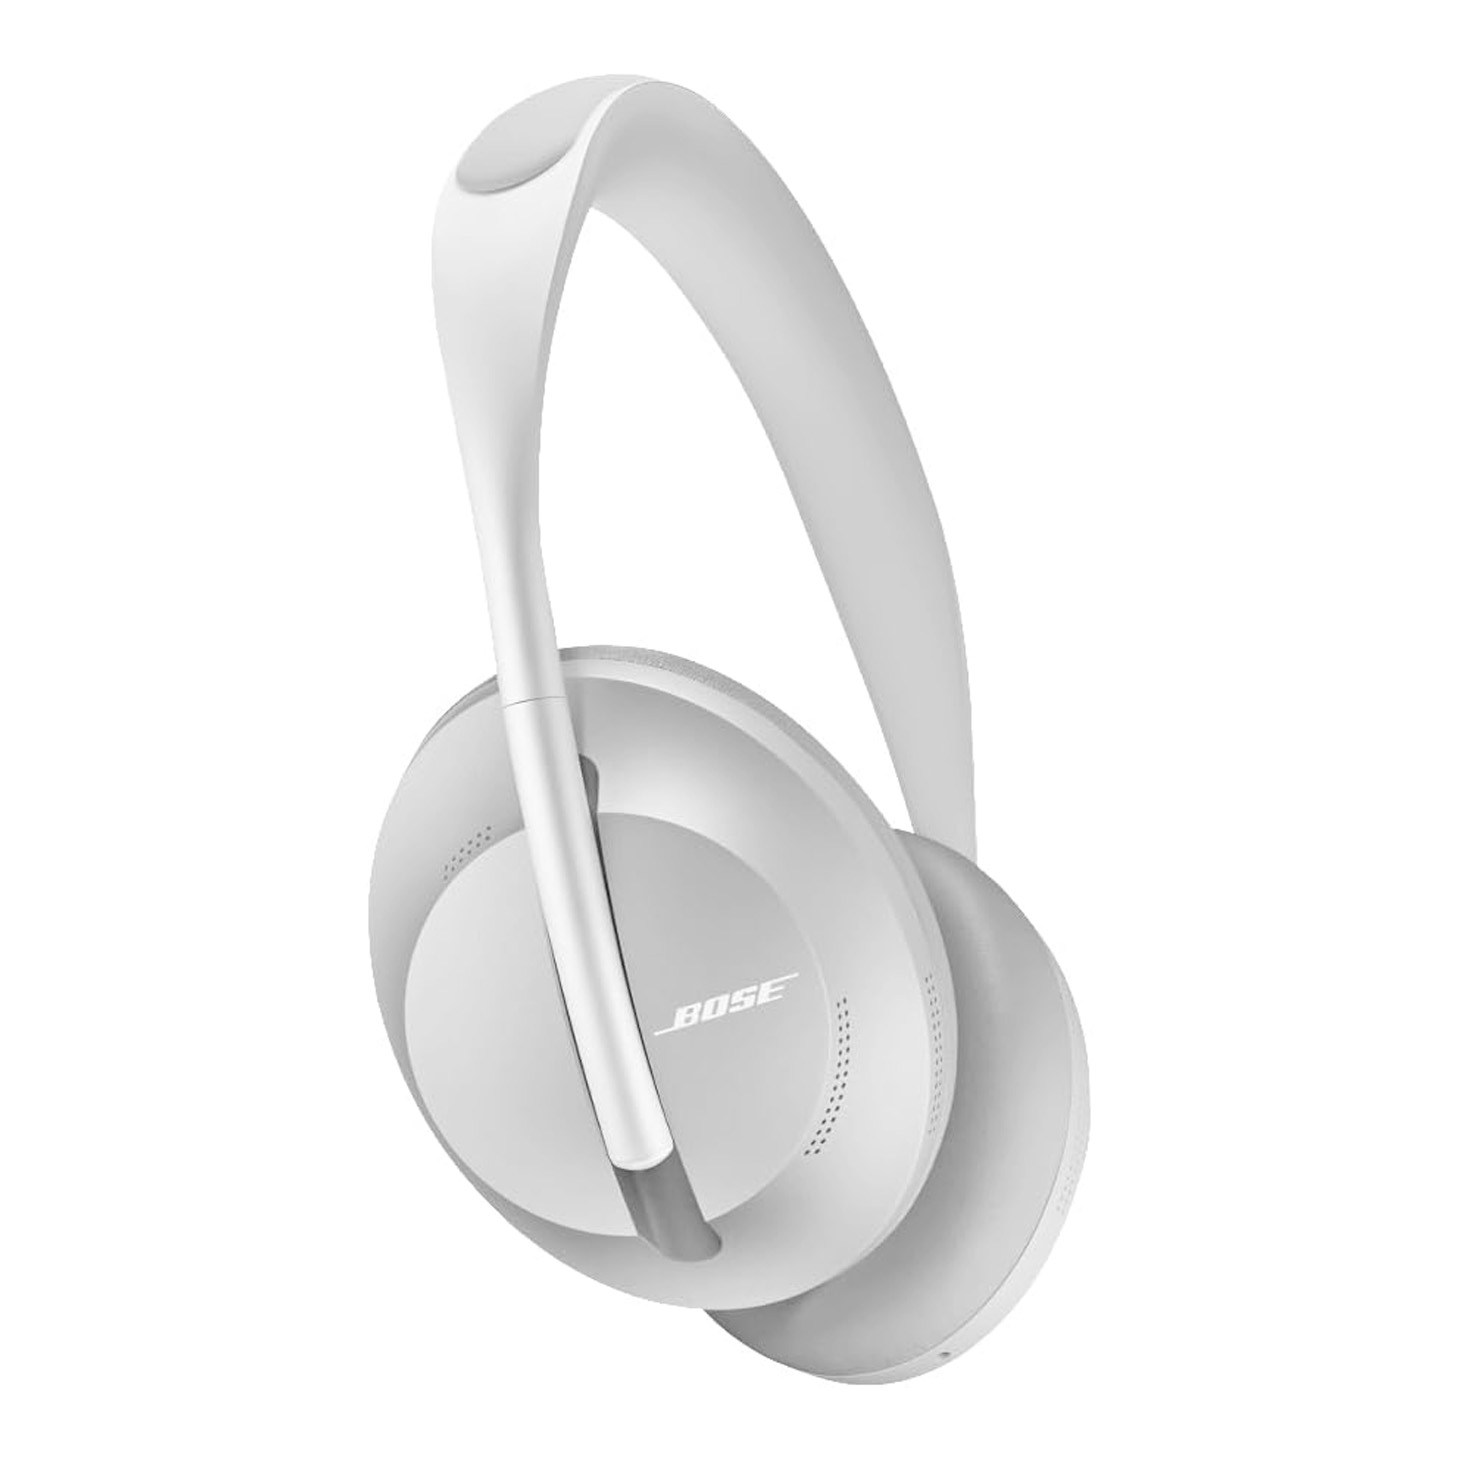 Bose Noise-canceling Headphones 700 side view in white